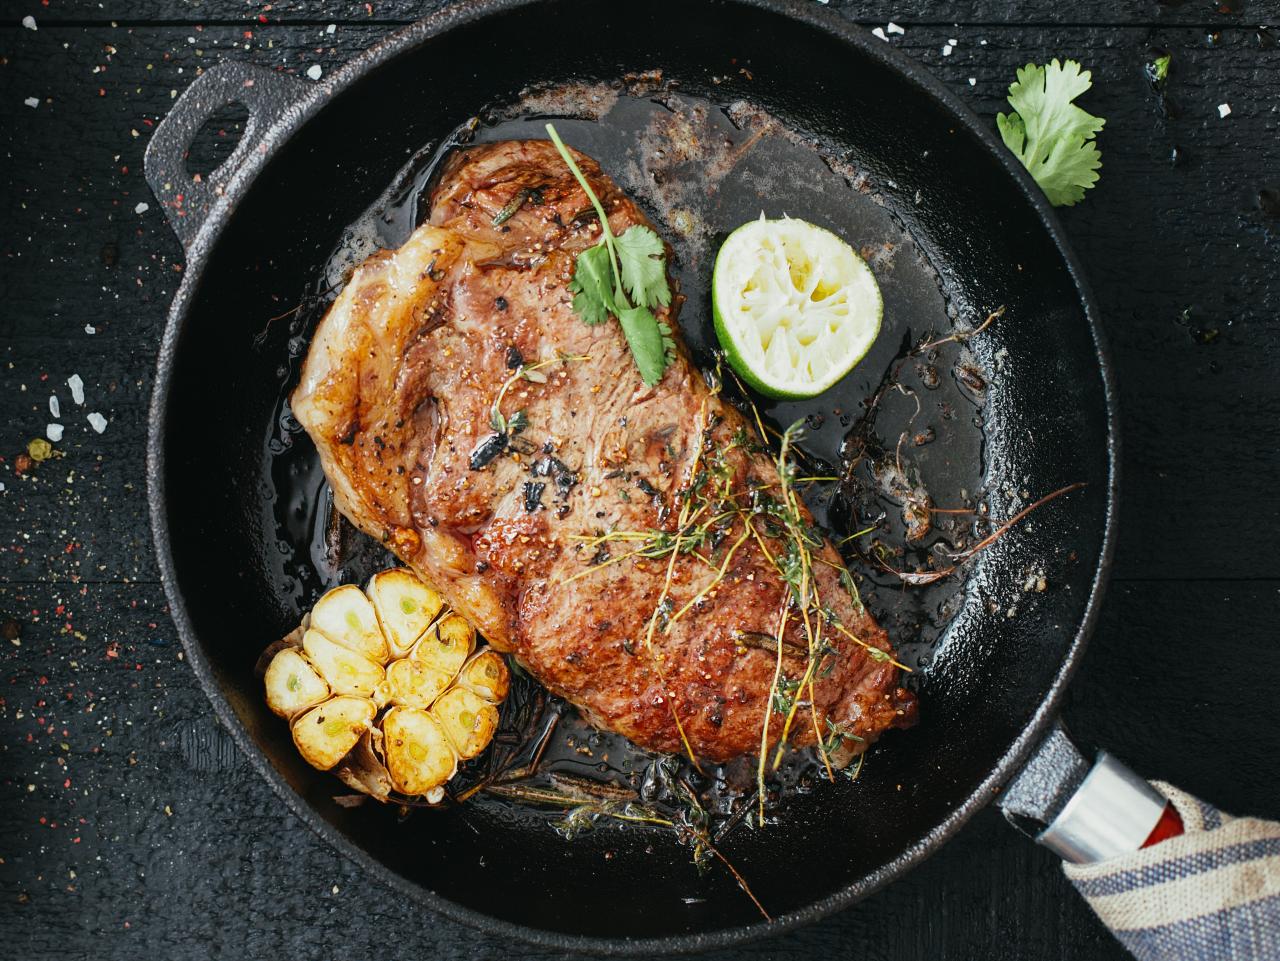 Pan Searing - The First Step to Cooking Steak